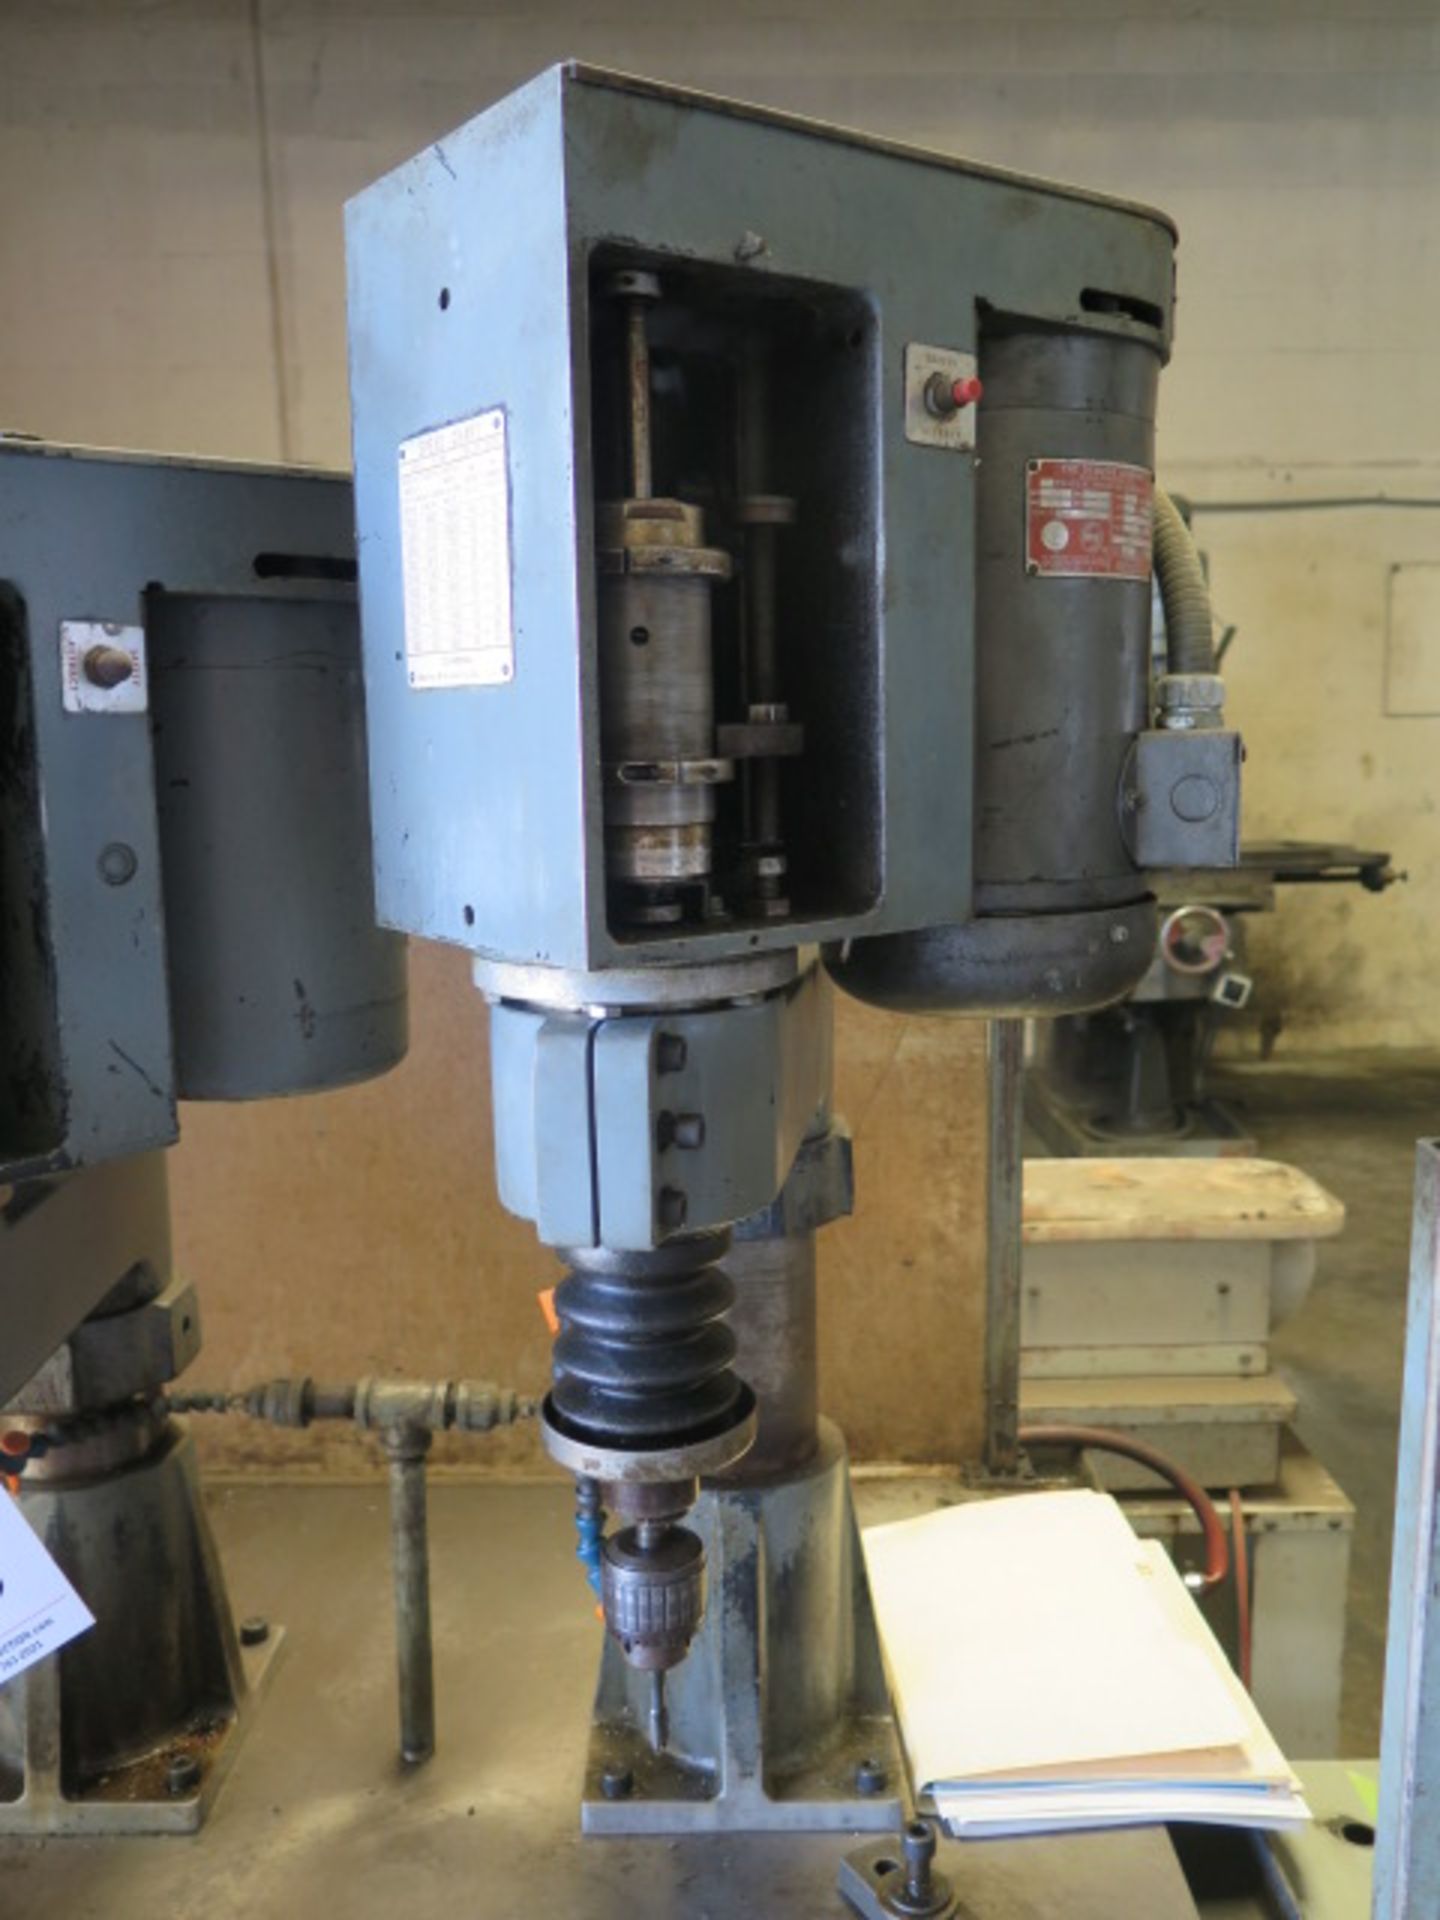 Dumore 2-Head Automatic Drilling/Tapping Machine w/ Dumore Pneumatic Heads, 17” x 36” Table - Image 3 of 6